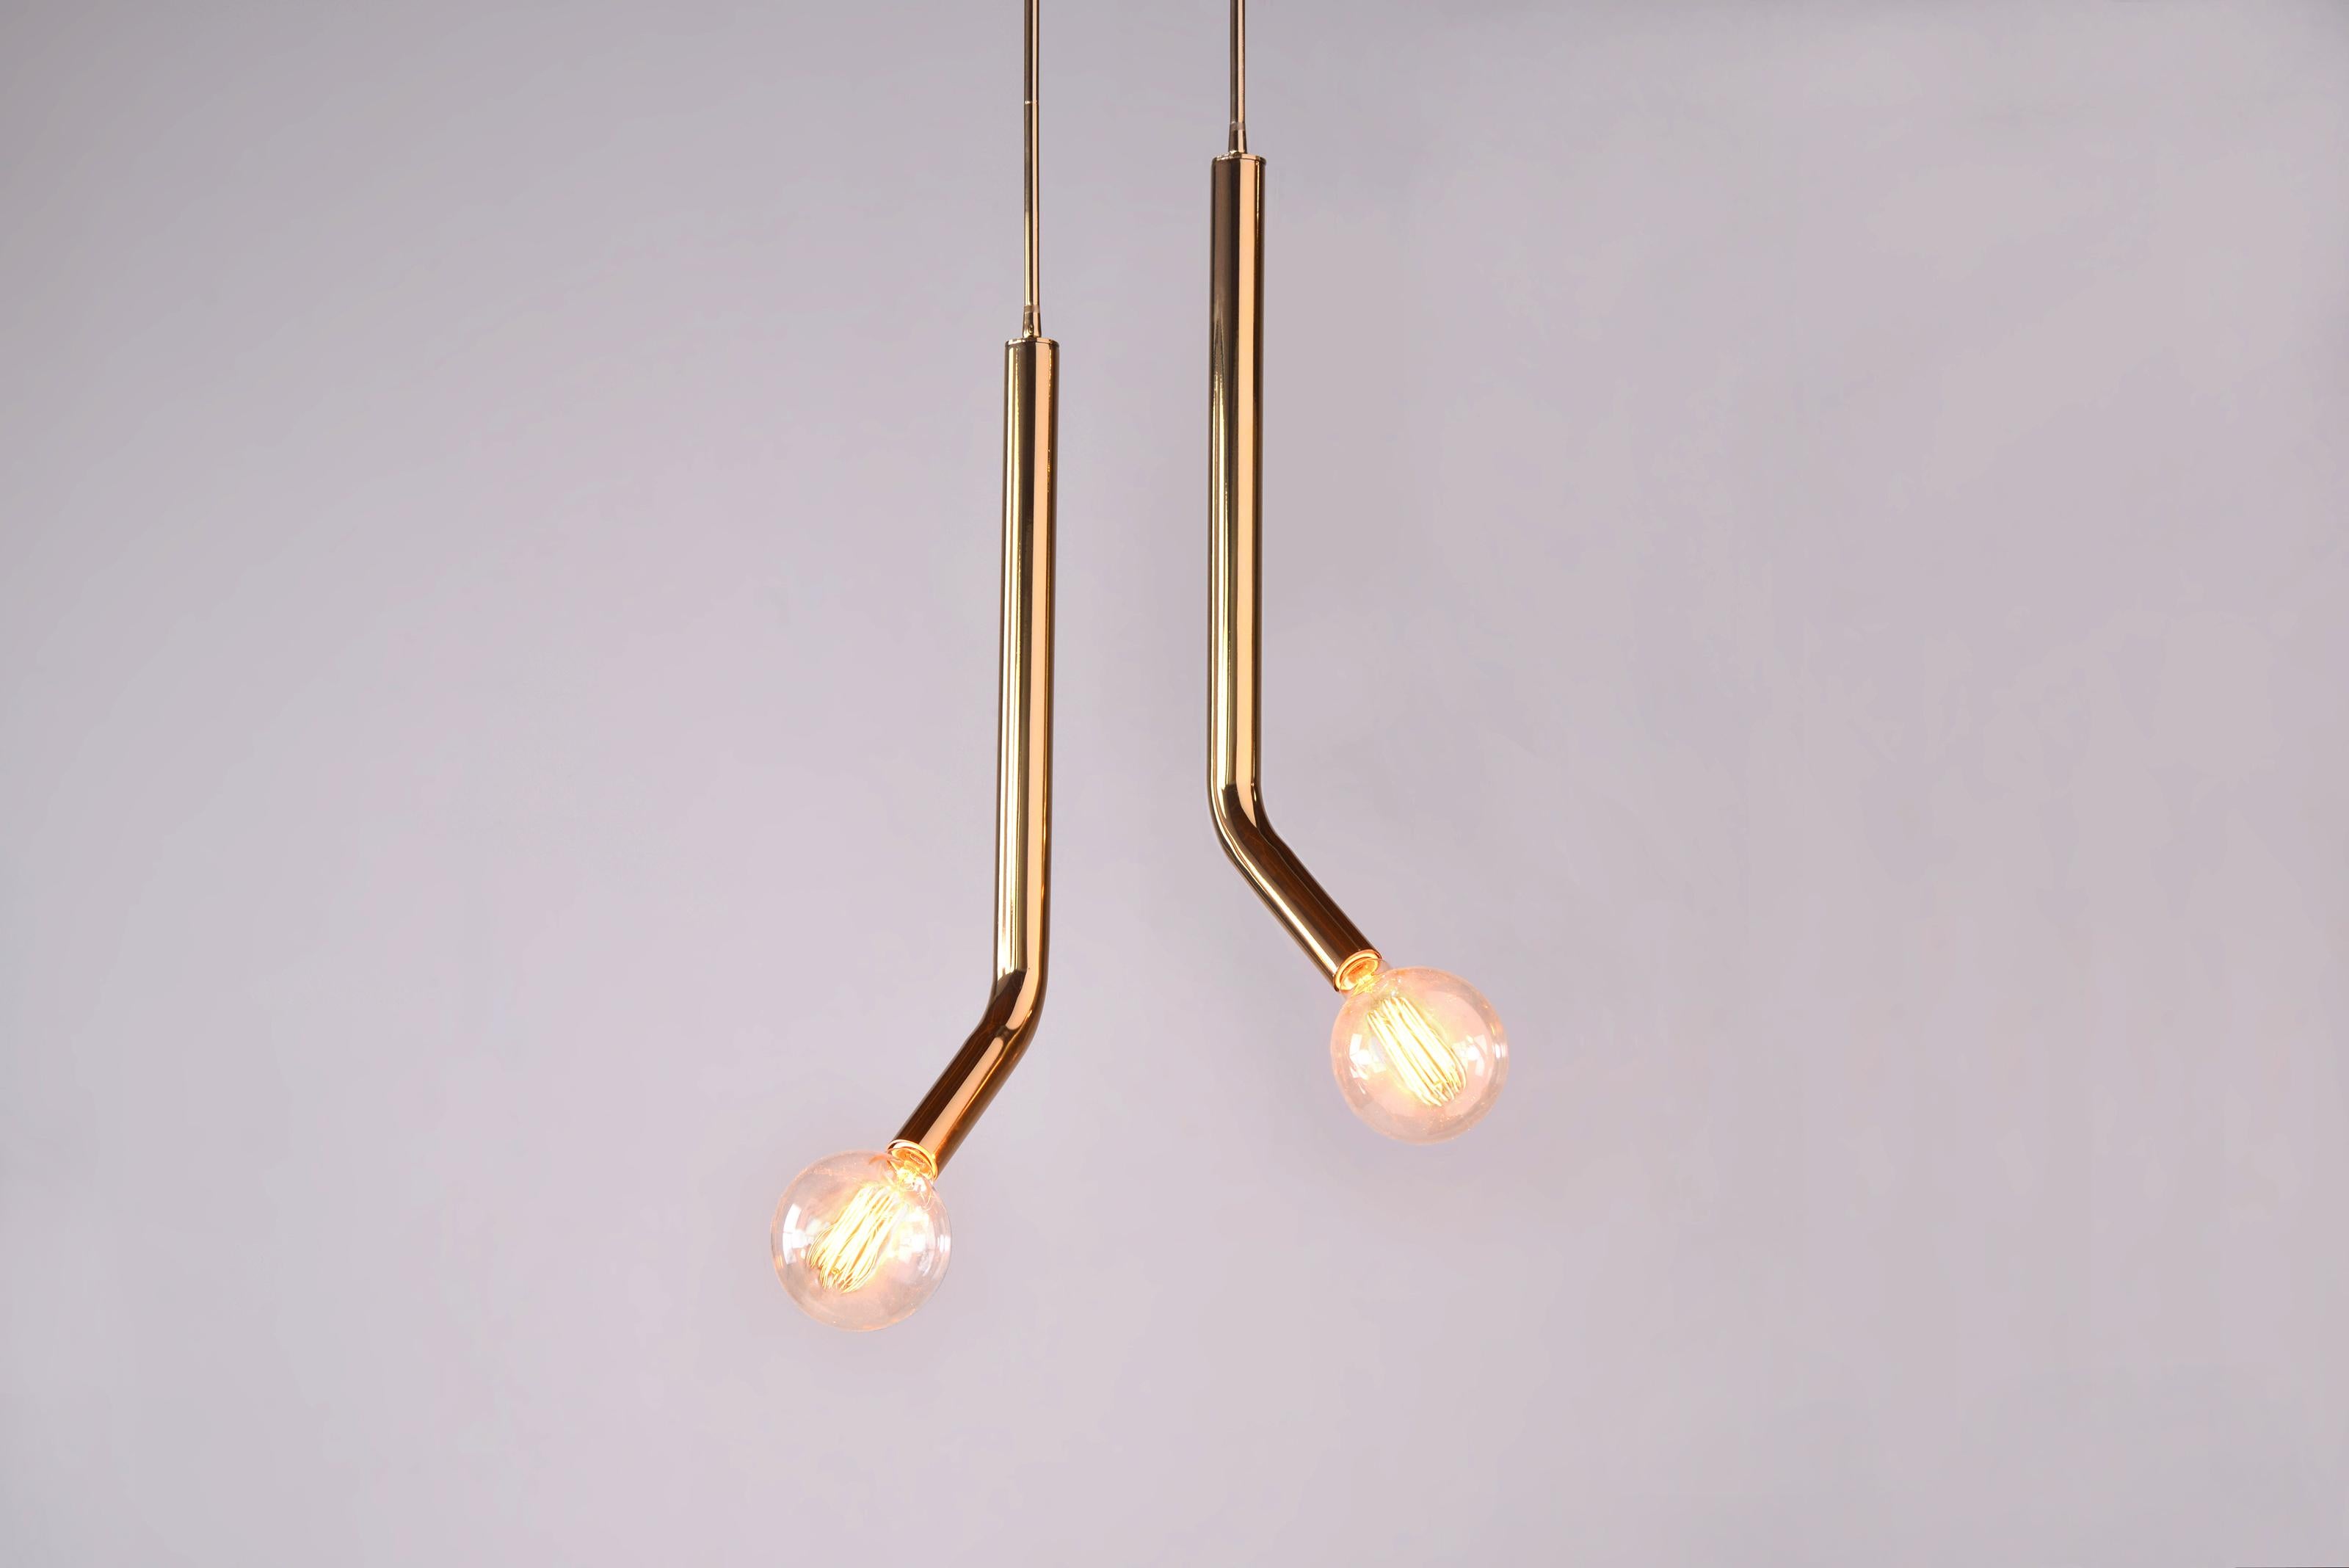 Set Of 2 Open Mic Pendant Lamps by Phase Design
Dimensions: D 16.5 x W 4.4 x H 53.3 cm. 
Materials: Smoked brass.

Fixtures are available in gloss or flat black and white powder coat, polished chrome, burnt copper, or smoked brass finish. Powder